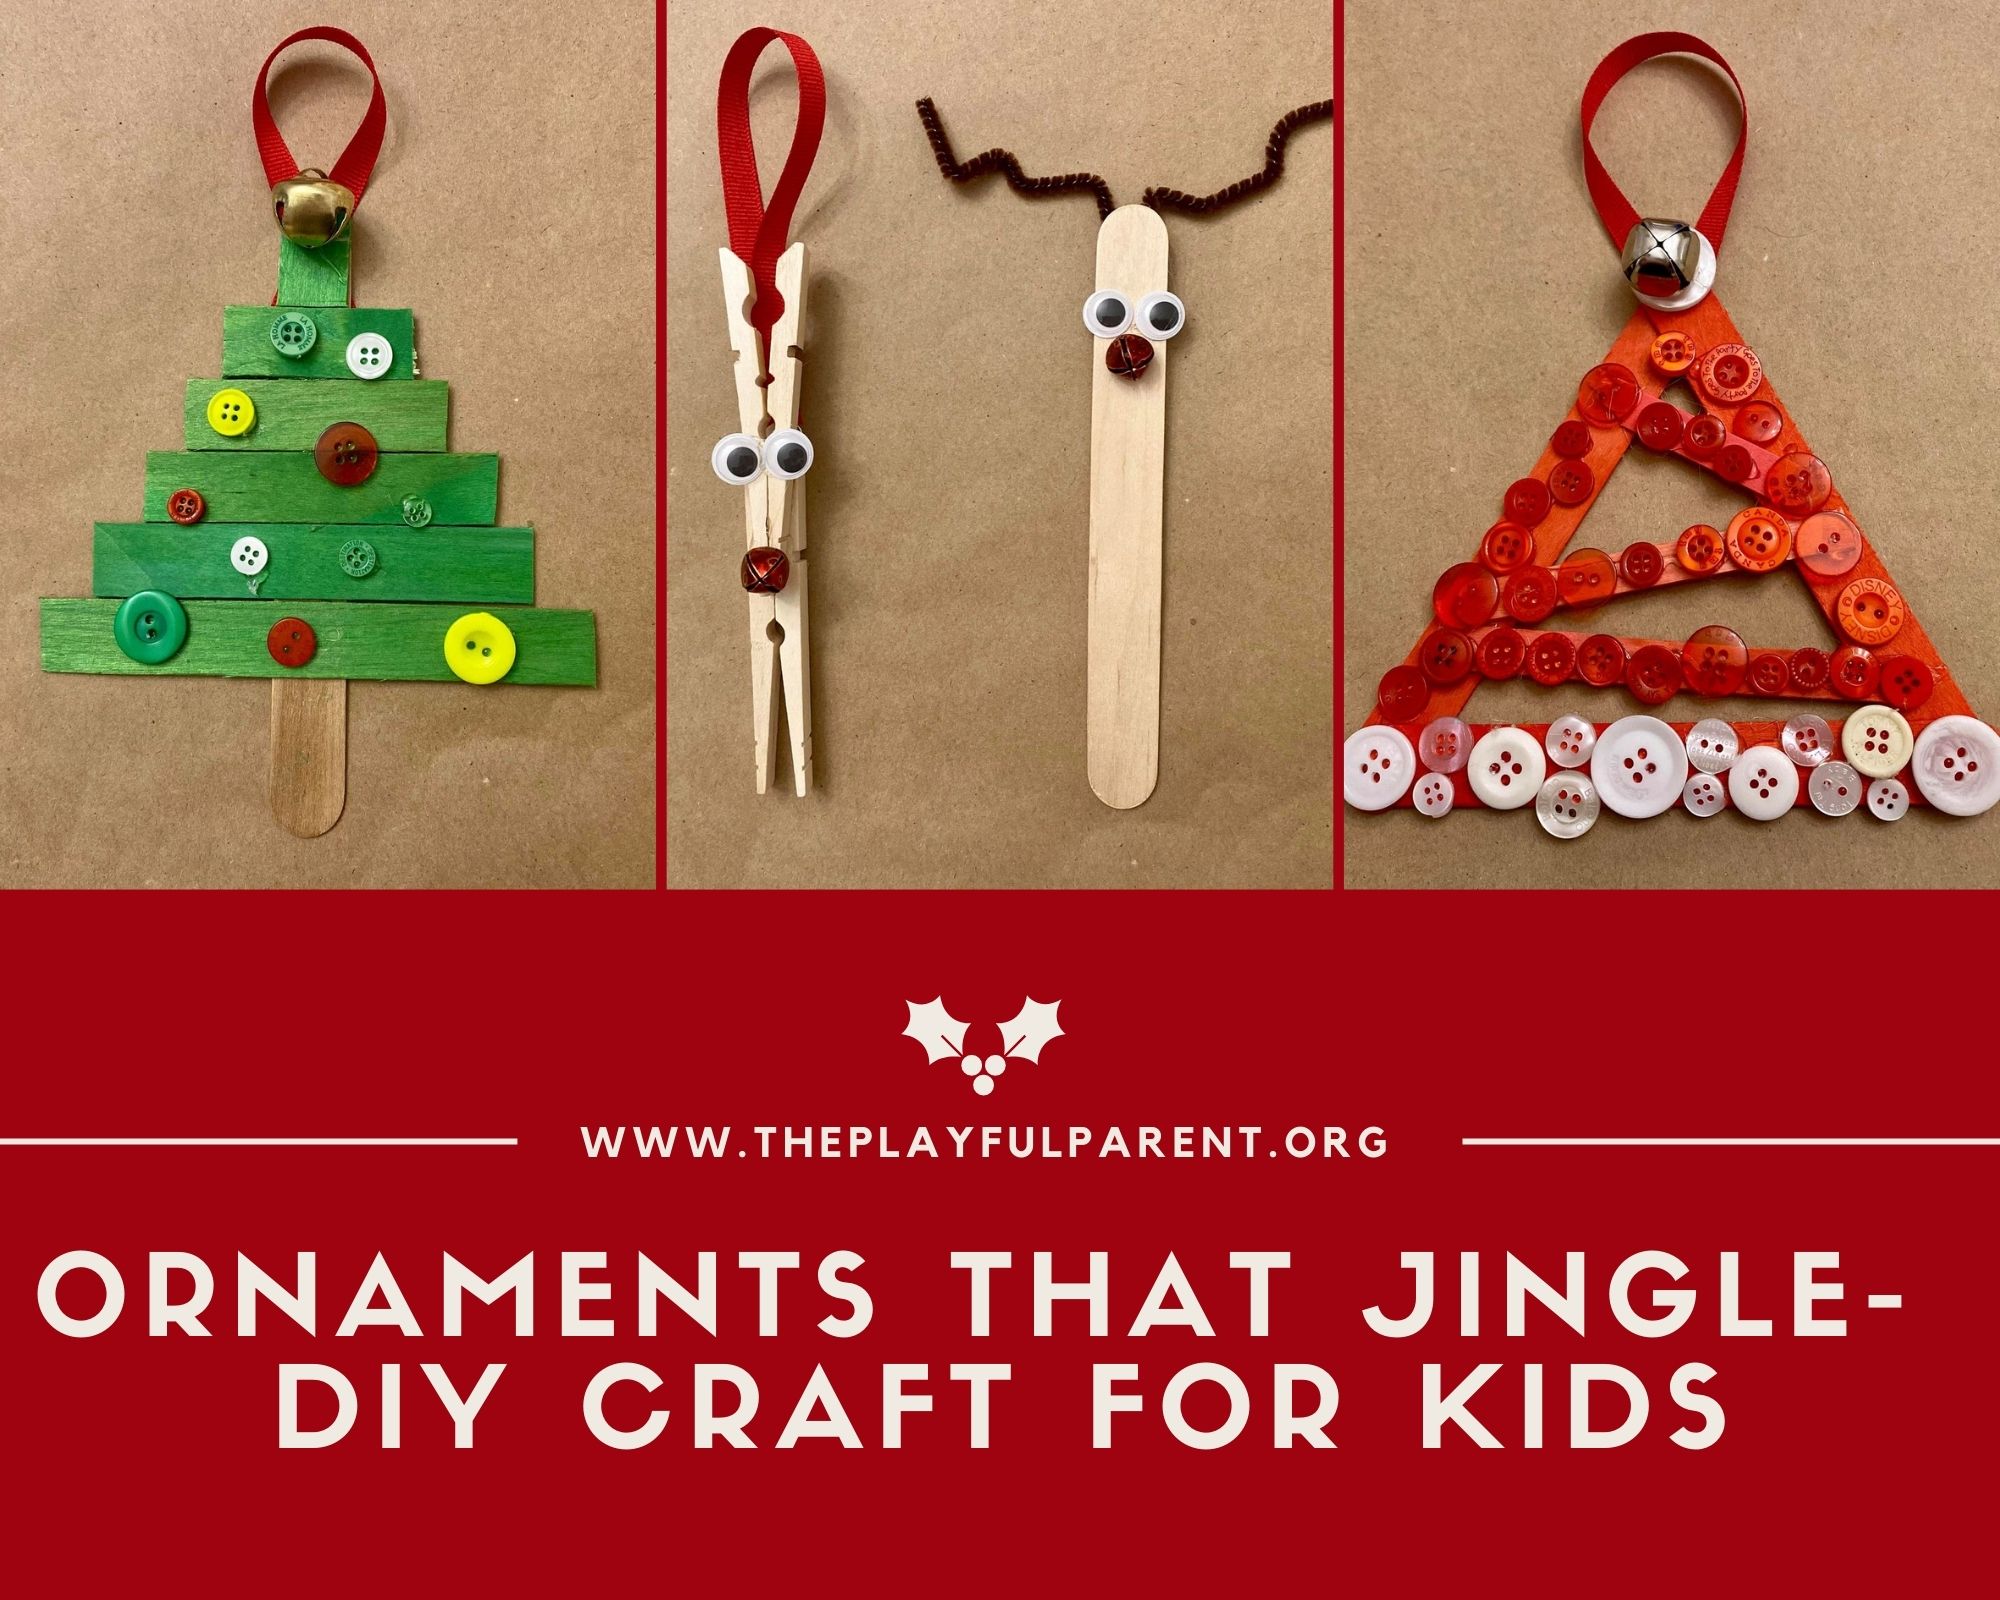 Fun and Festive Crafts for Kids Using Jingle Bells